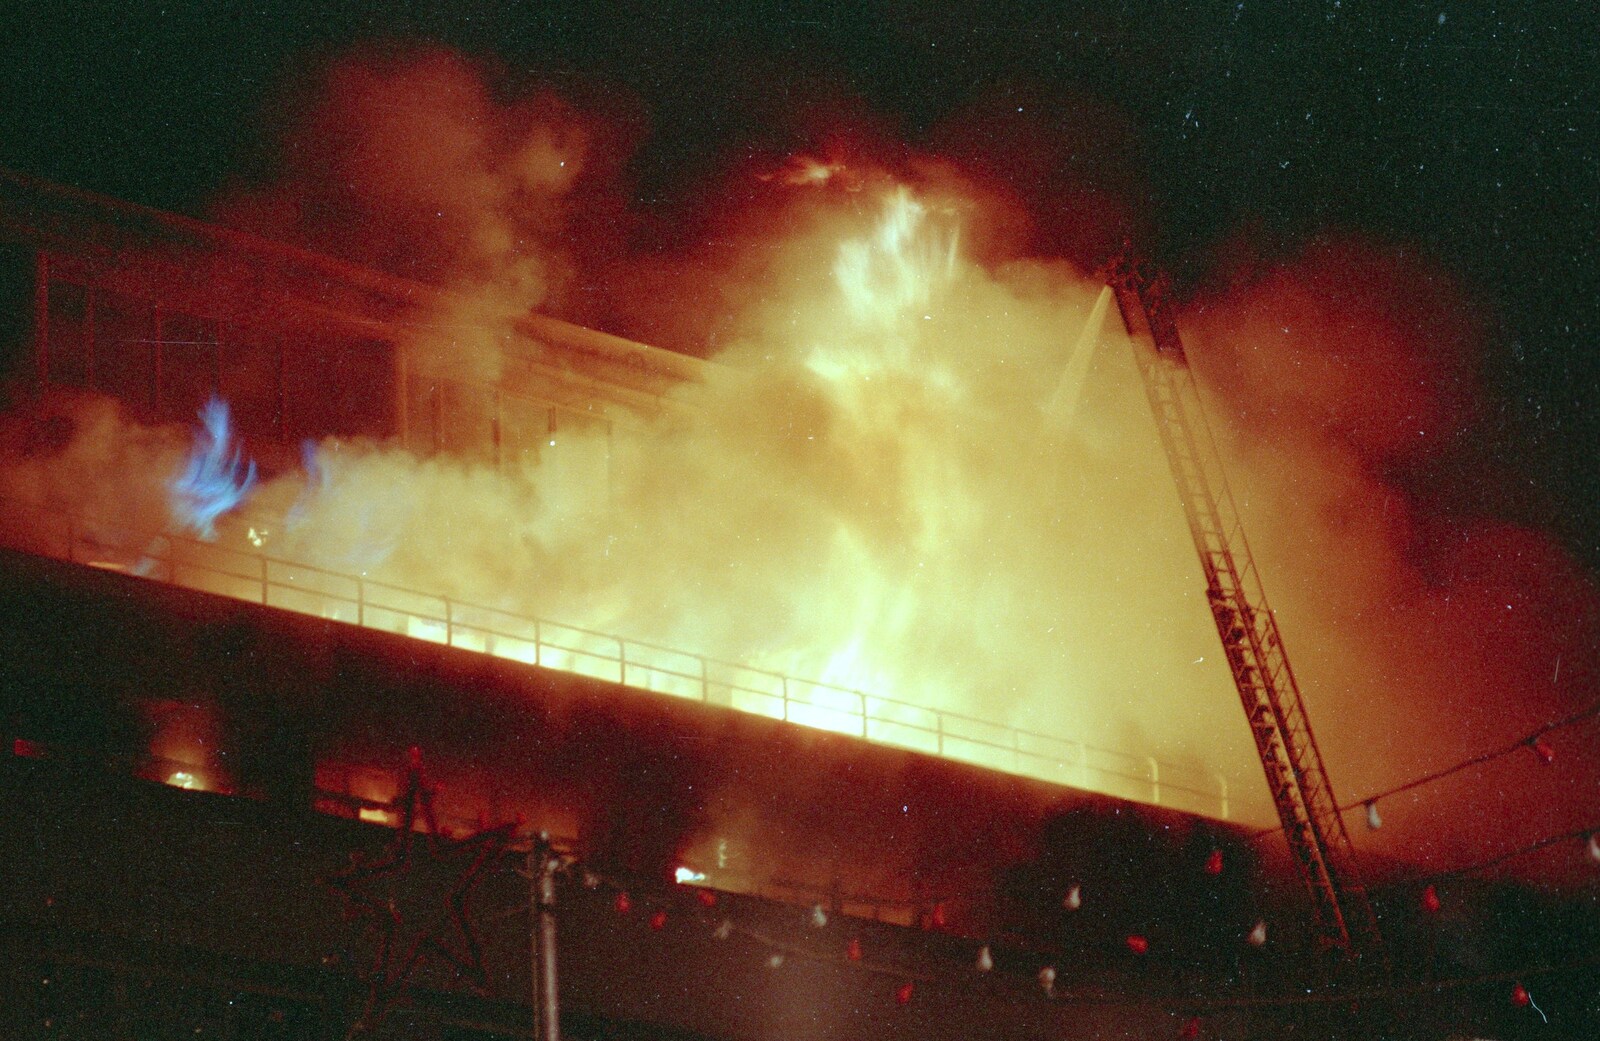 More intense fire and hot blue flames from Uni: The Fire-Bombing of Dingles, Plymouth, Devon - 19th December 1988